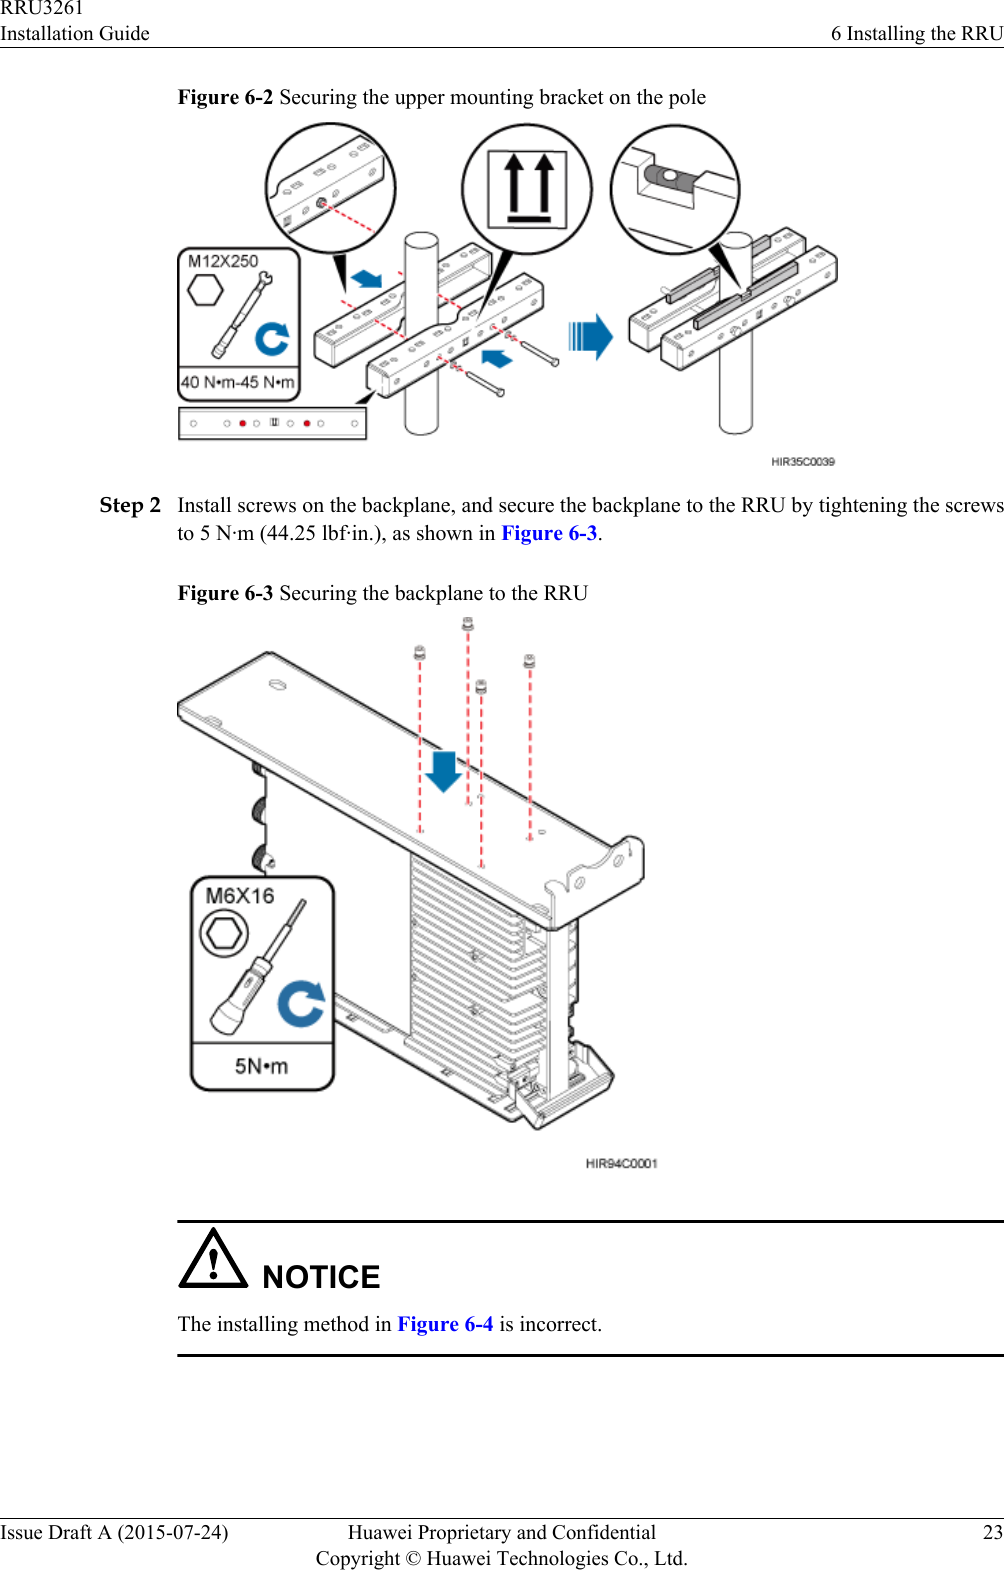 Figure 6-2 Securing the upper mounting bracket on the poleStep 2 Install screws on the backplane, and secure the backplane to the RRU by tightening the screwsto 5 N·m (44.25 lbf·in.), as shown in Figure 6-3.Figure 6-3 Securing the backplane to the RRUNOTICEThe installing method in Figure 6-4 is incorrect.RRU3261Installation Guide 6 Installing the RRUIssue Draft A (2015-07-24) Huawei Proprietary and ConfidentialCopyright © Huawei Technologies Co., Ltd.23